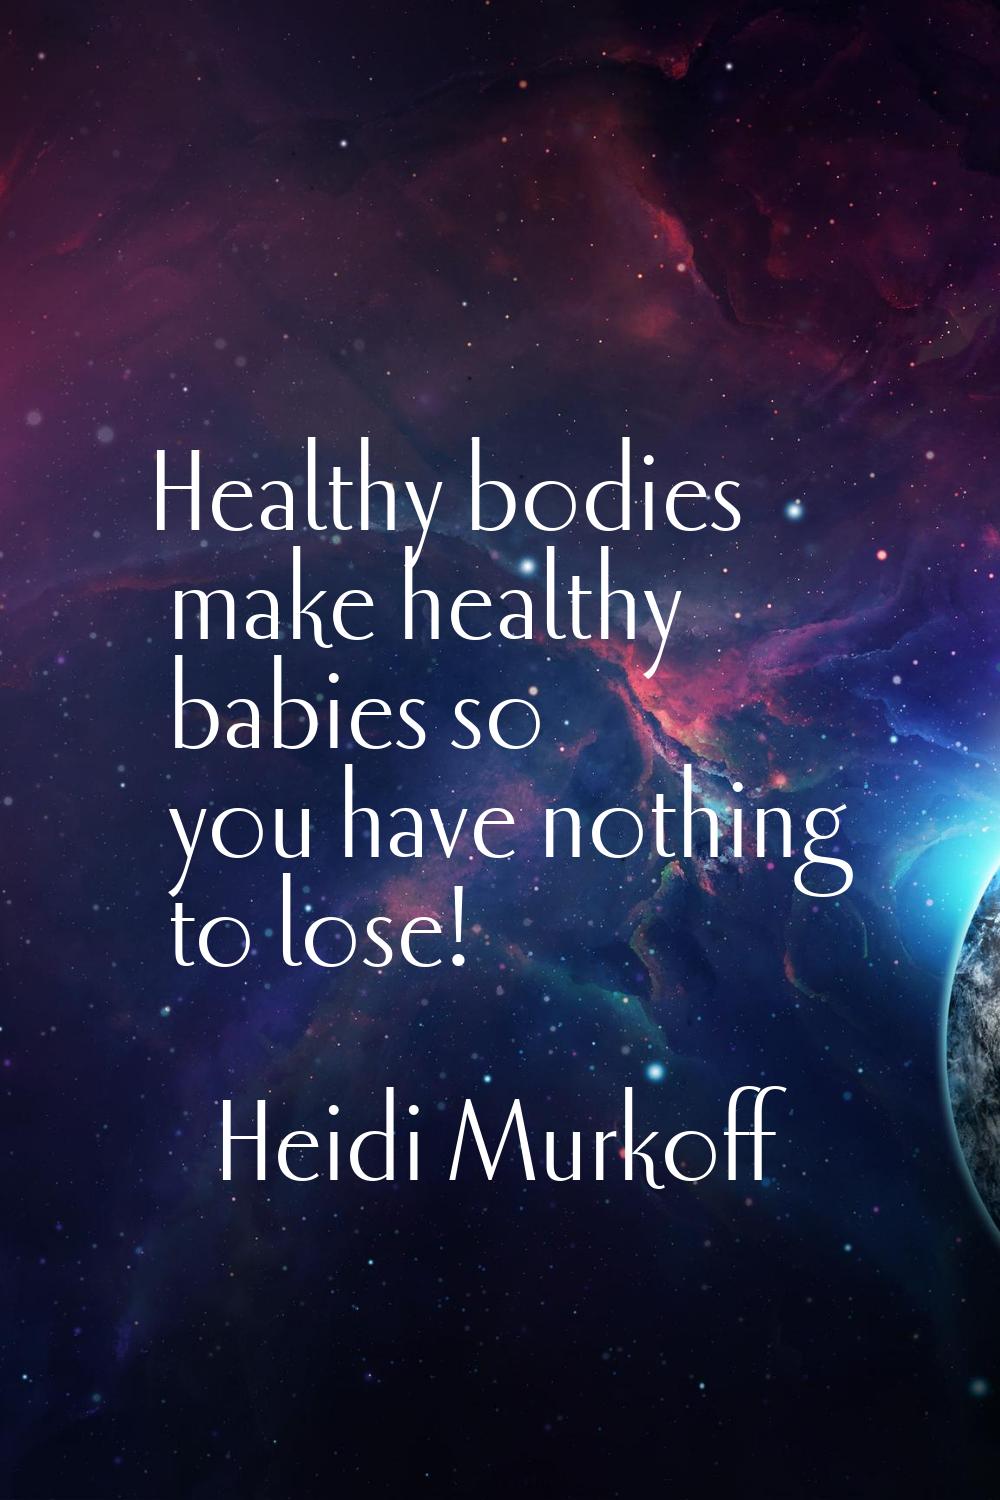 Healthy bodies make healthy babies so you have nothing to lose!